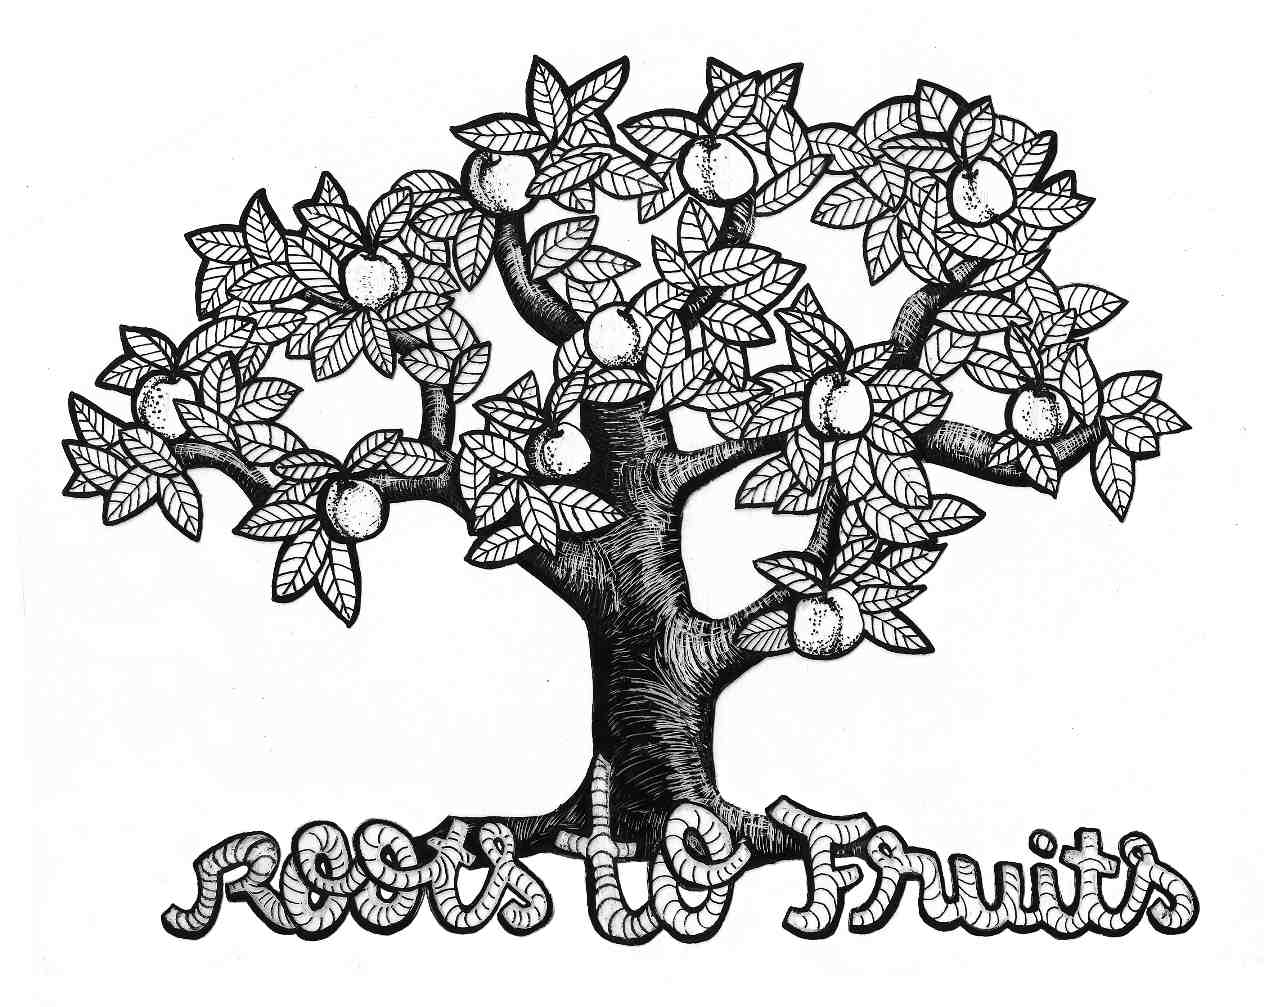 Black Tree with Roots Logo - Events